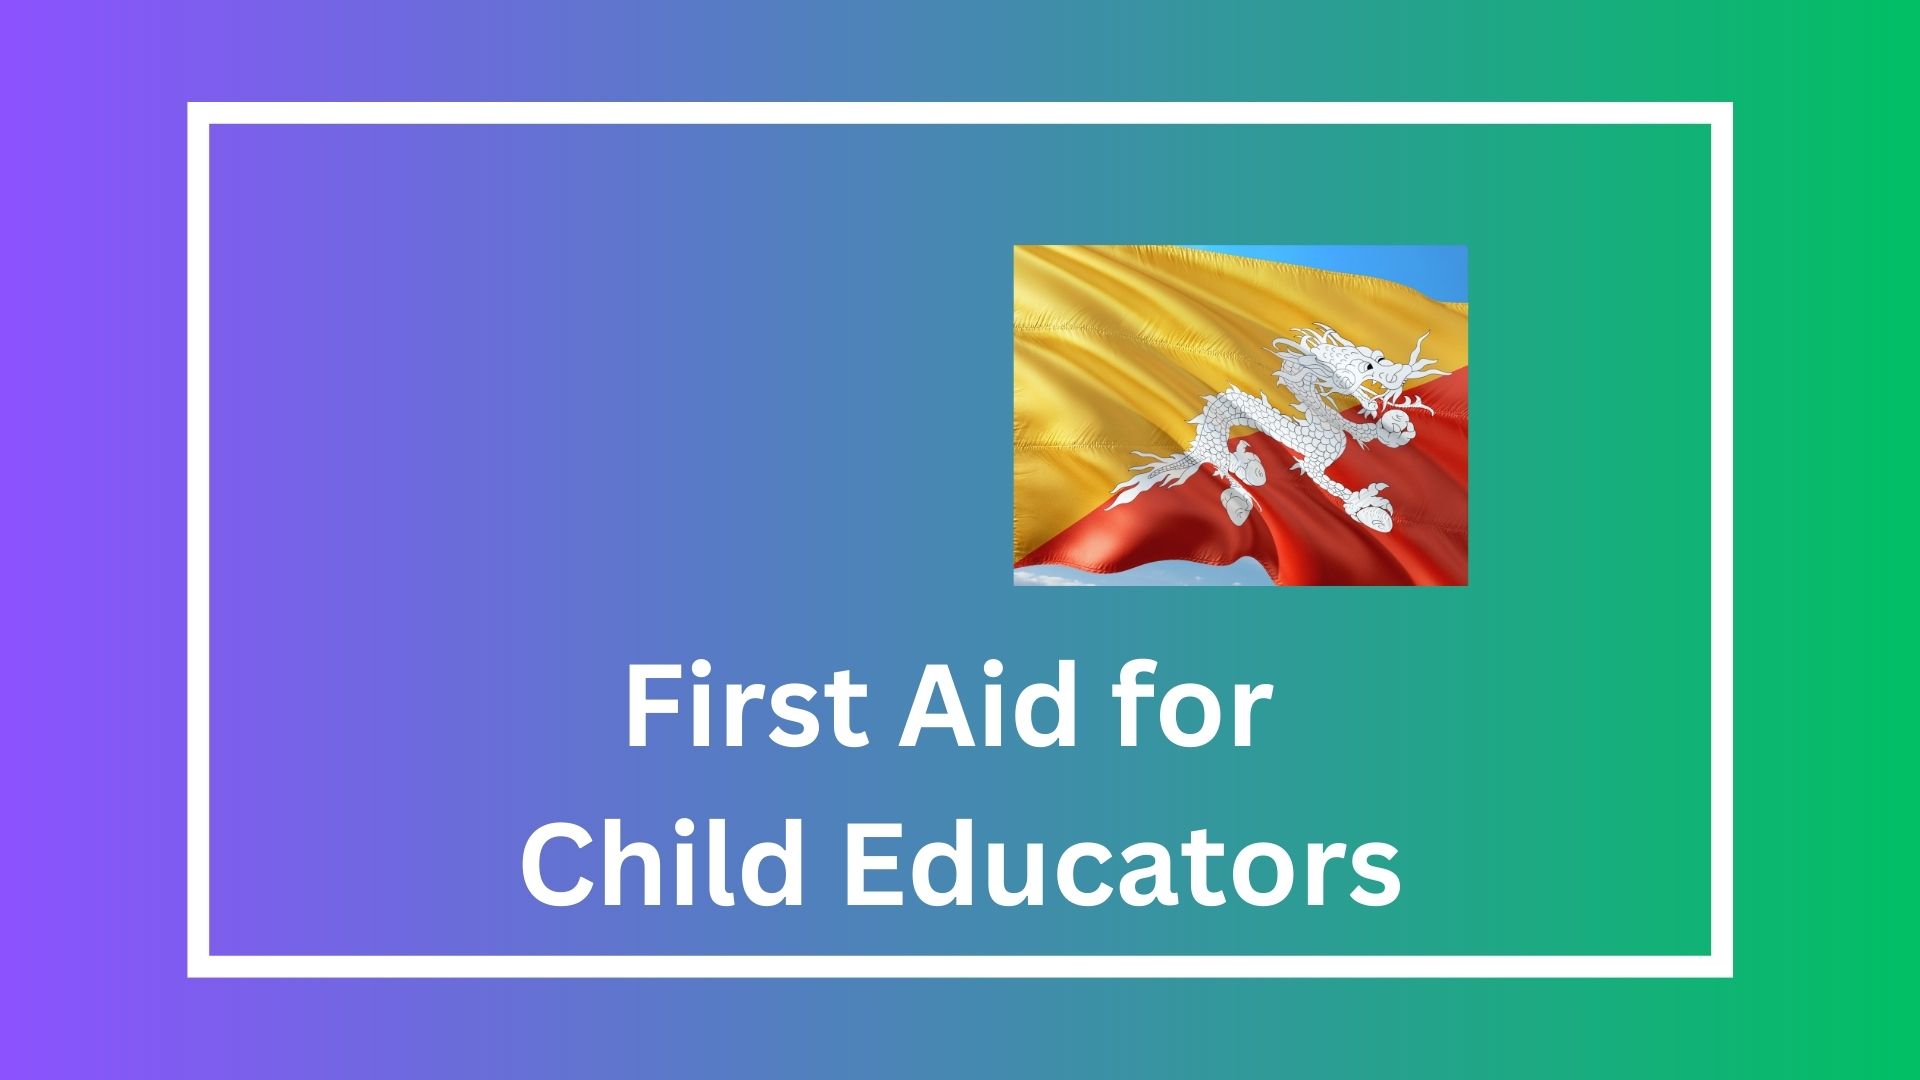 First Aid for Child Educators